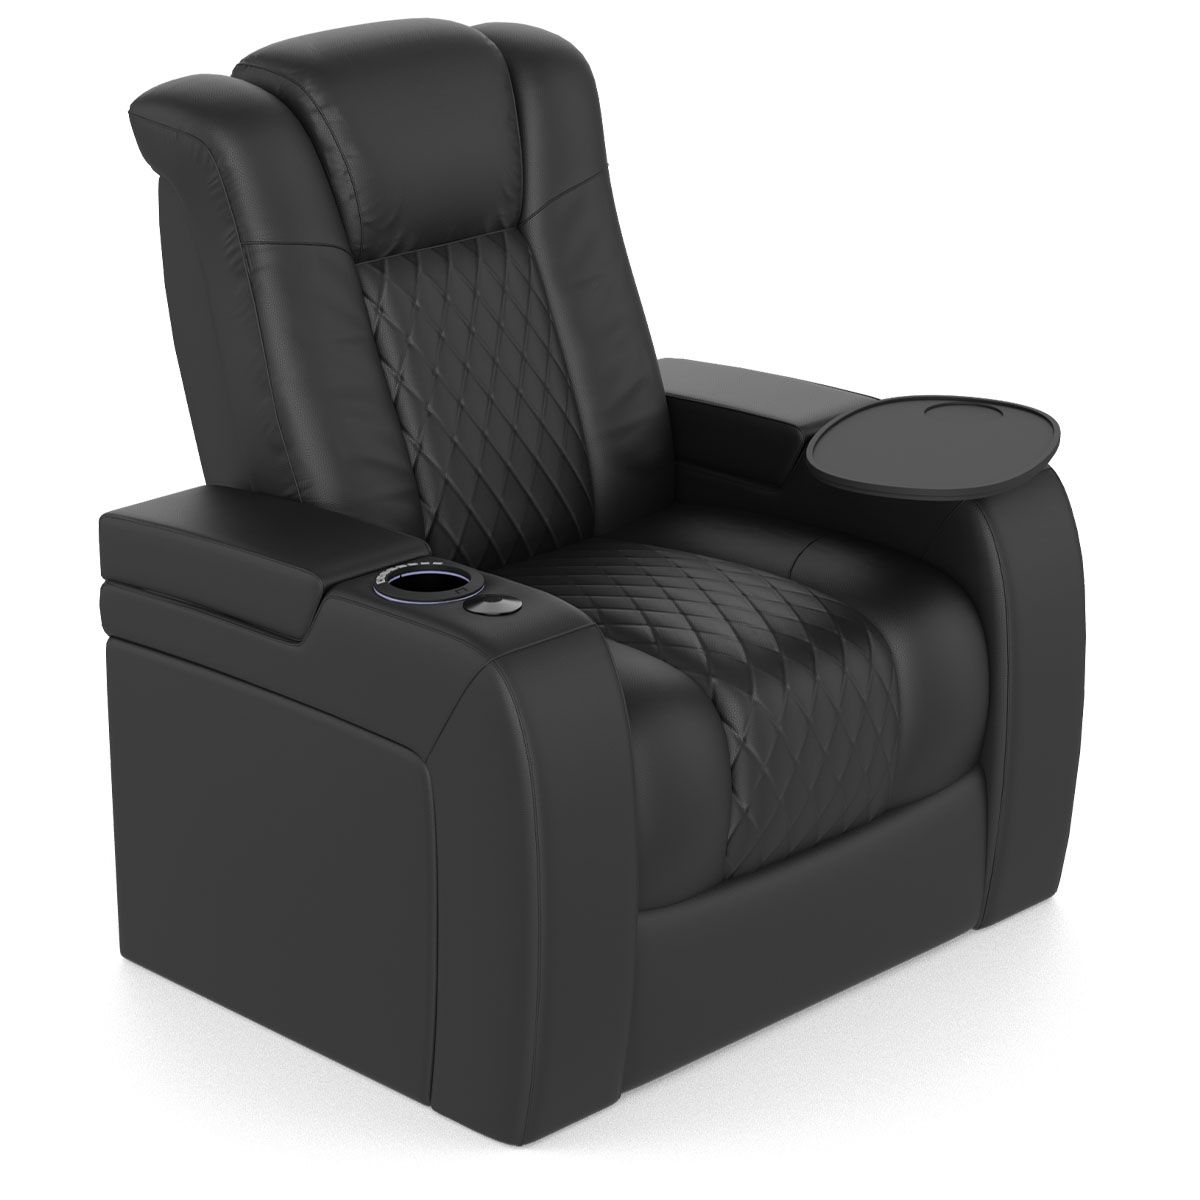 Audio Advice Revelation Home Theater Seating - left angled top view of 2 arm chair with tray table